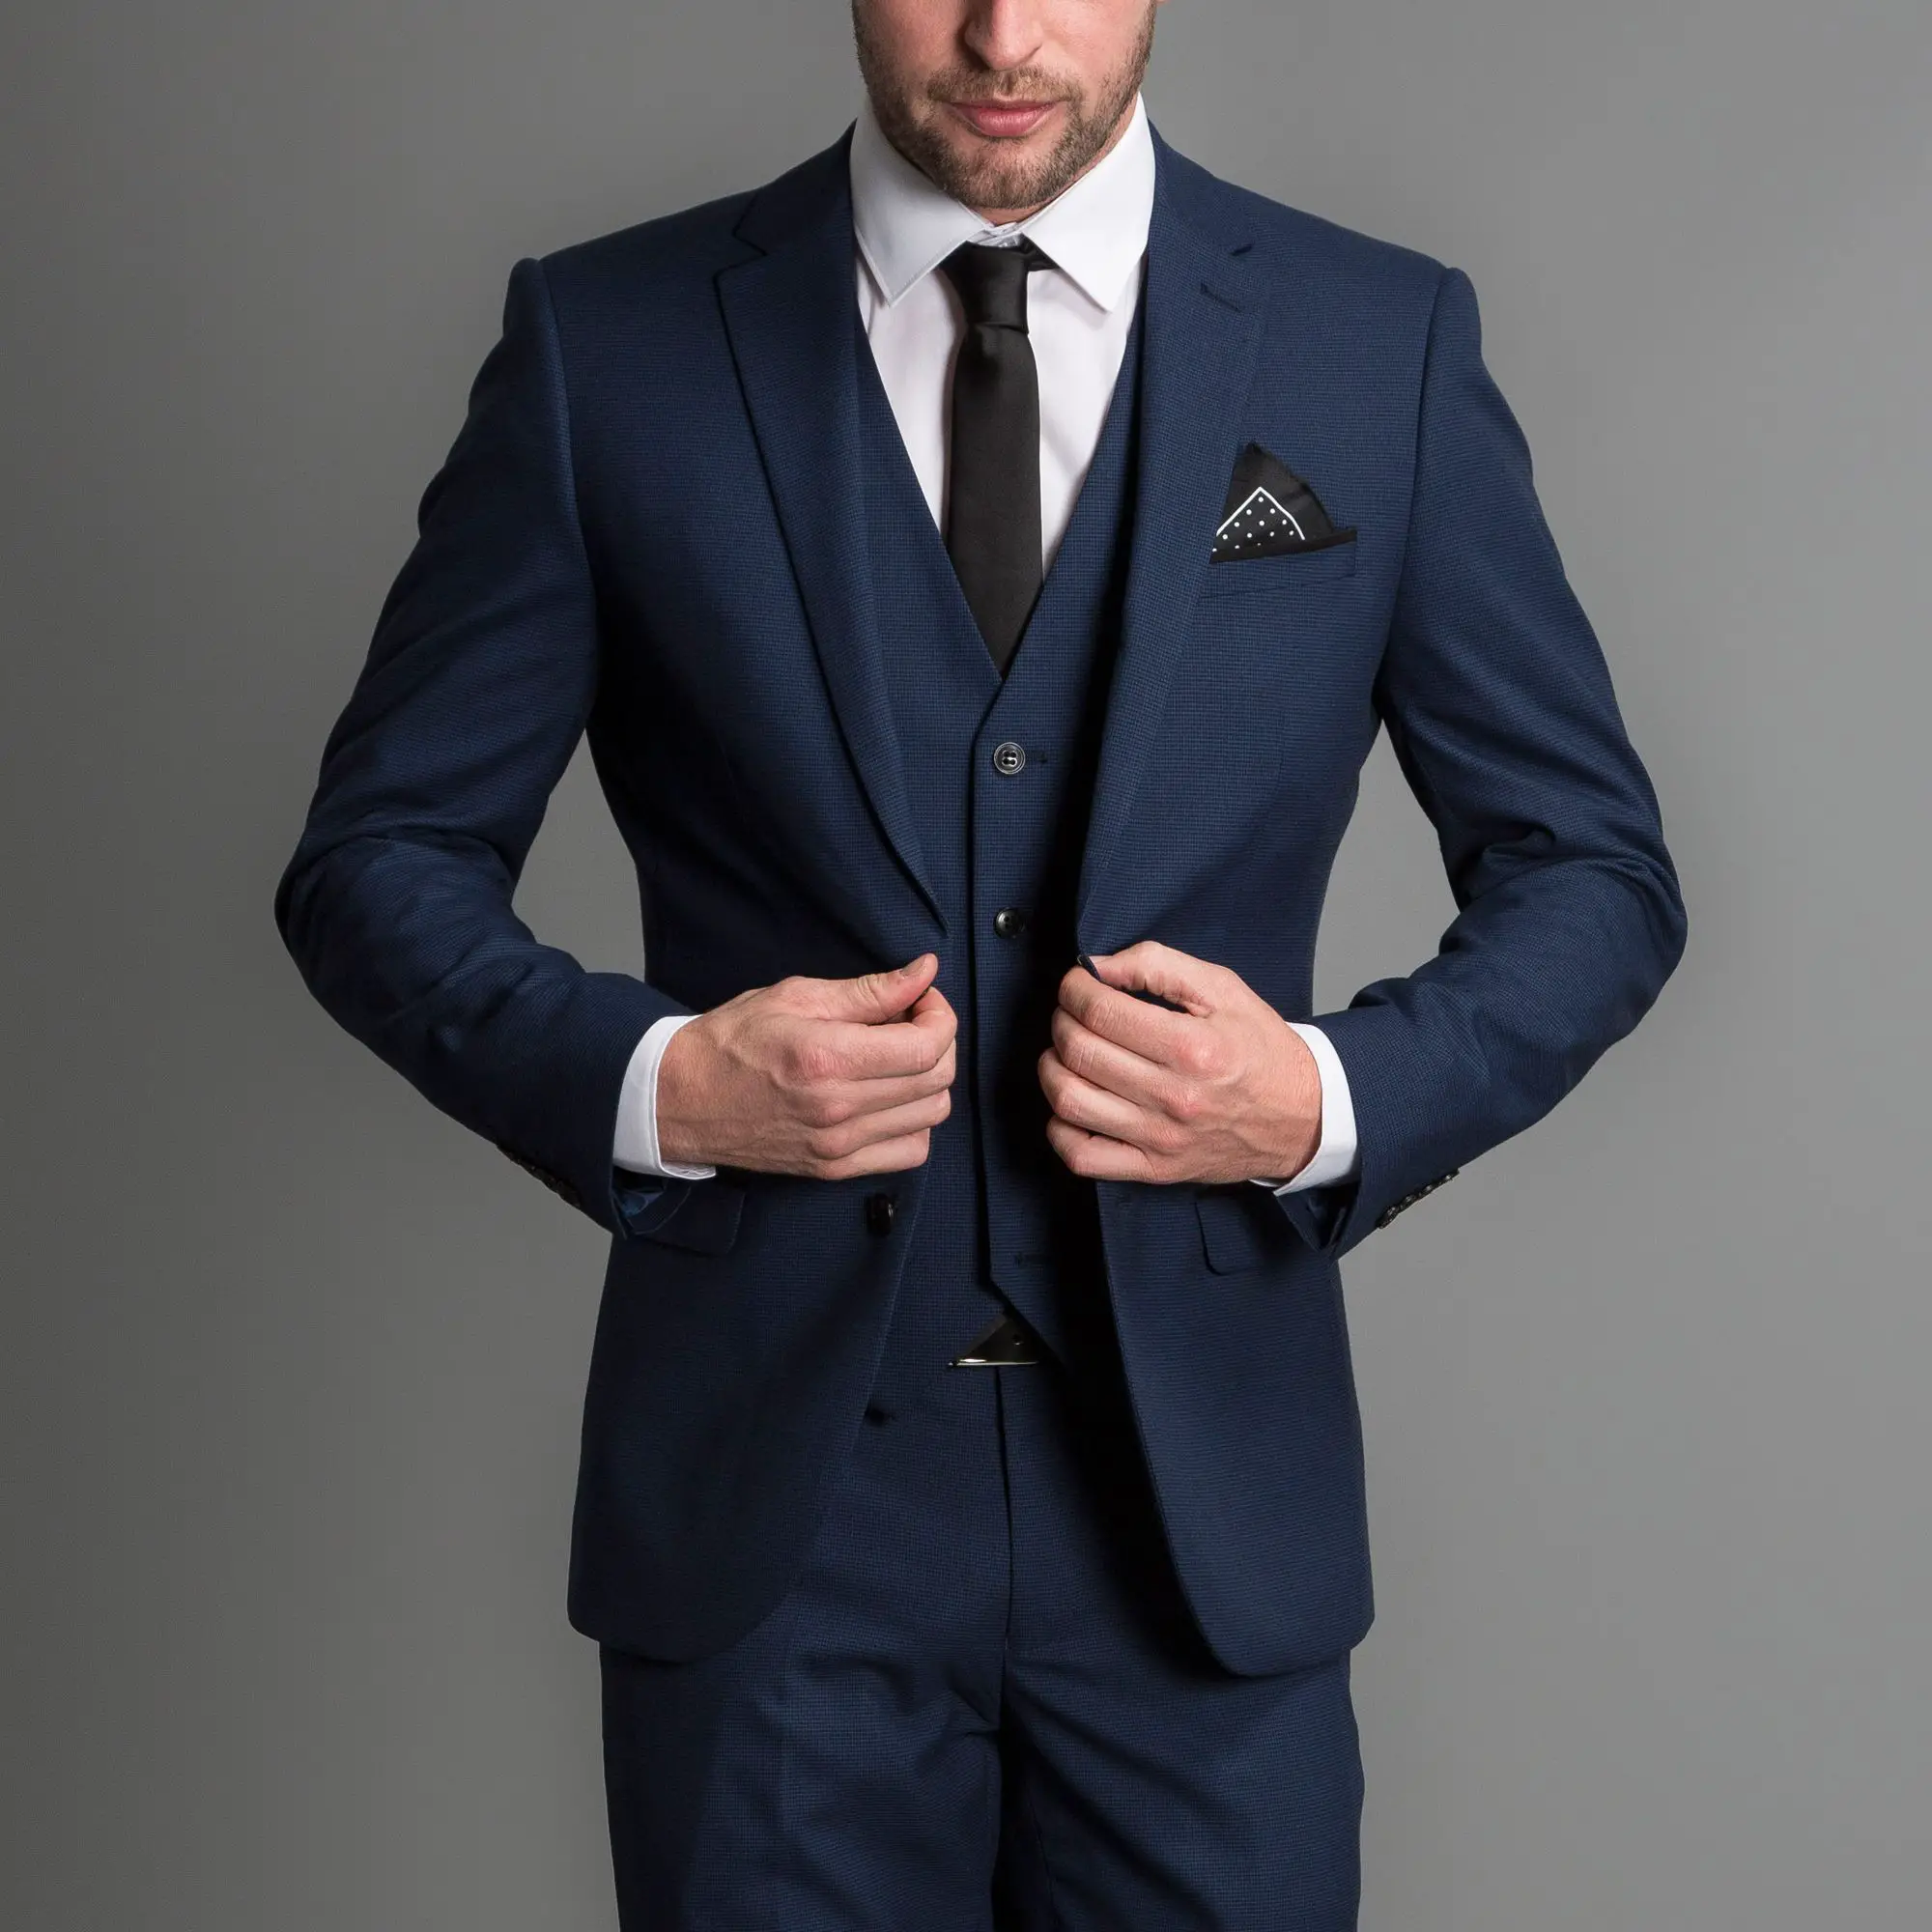 ONESIX5IVE Slim Fit Blue Puppytooth Three Piece Suit